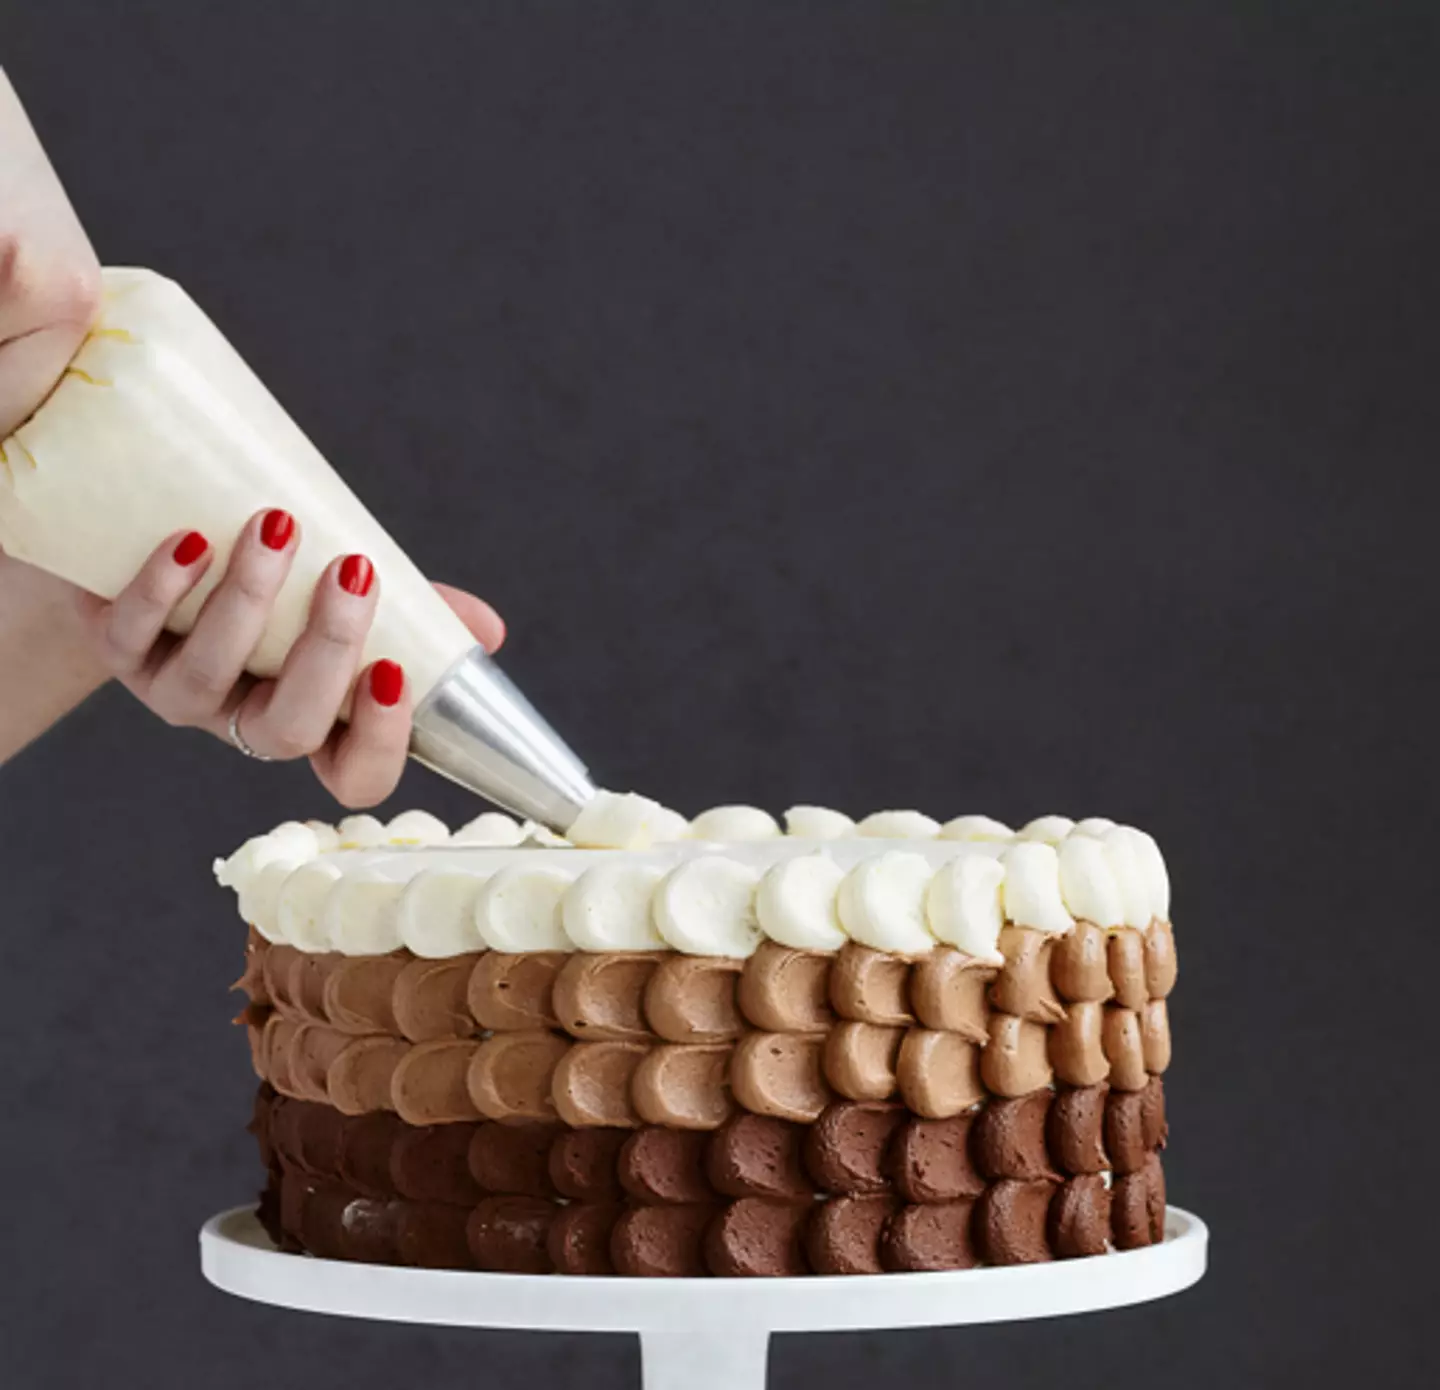 'Icing' in the dating world has nothing to do with actual baking (